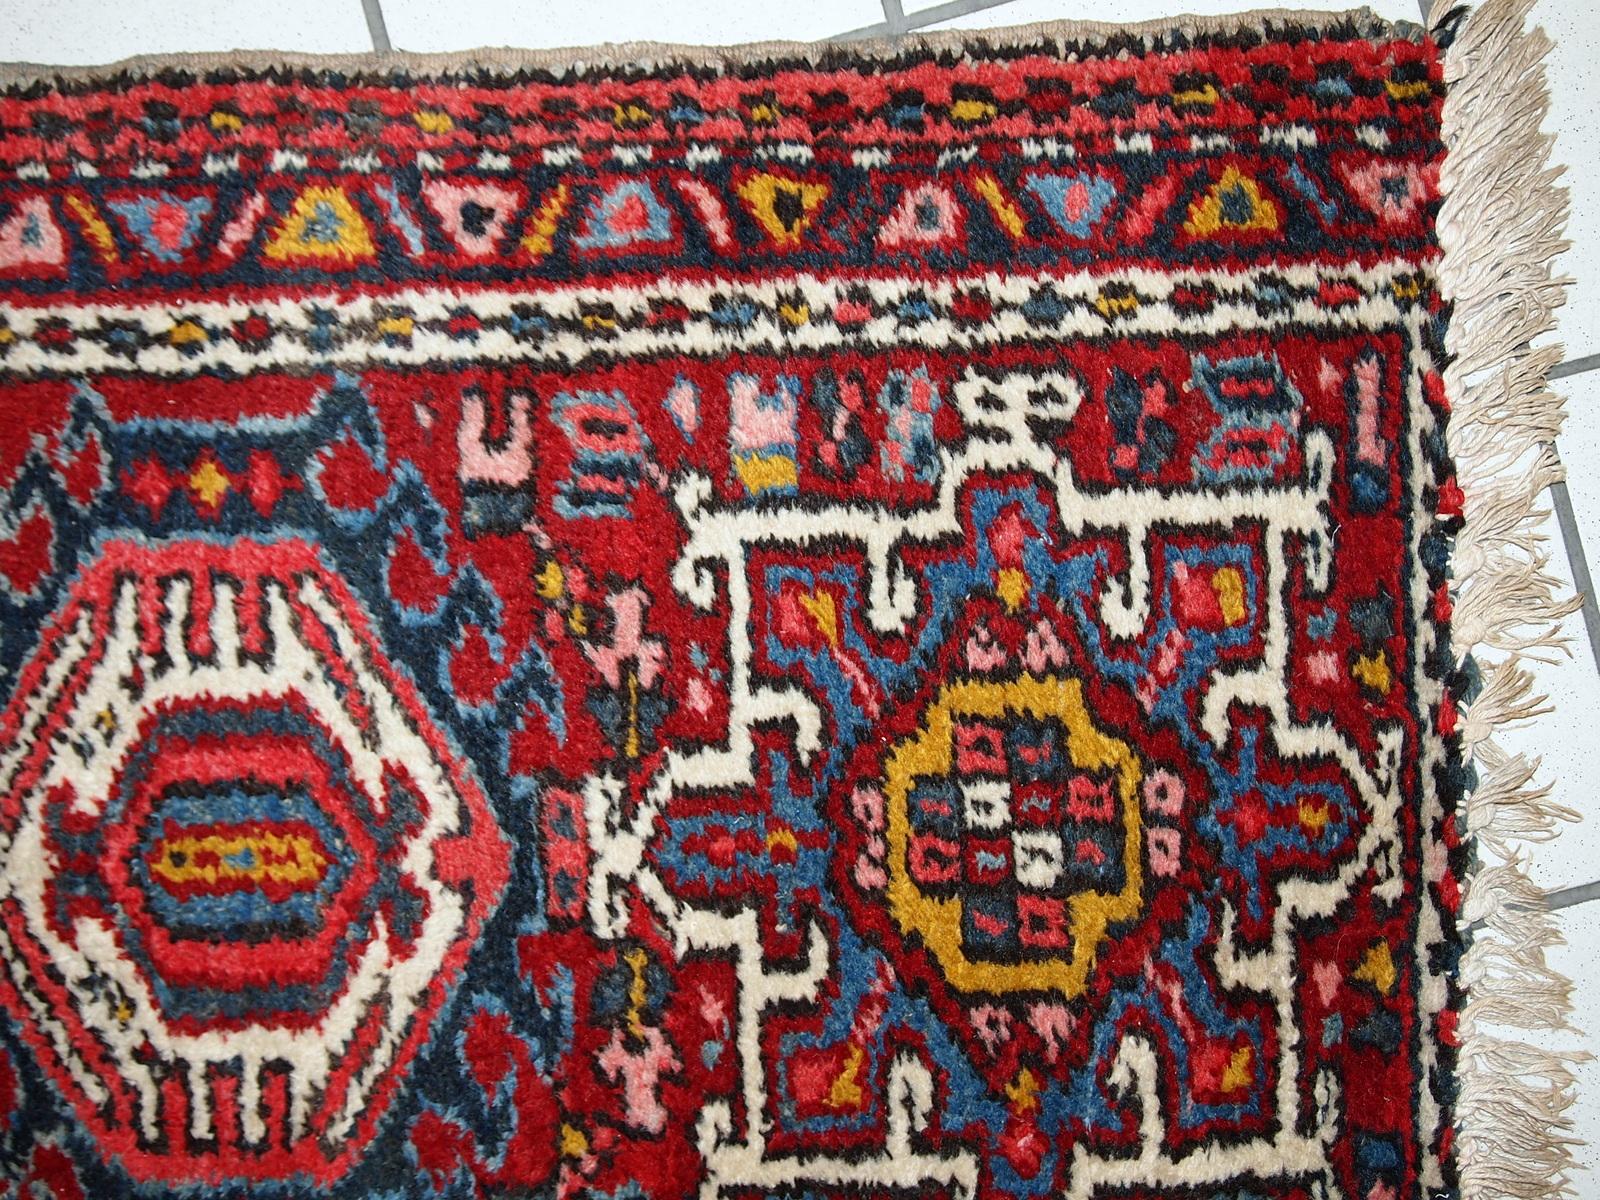 Handmade antique Karajeh rug in original good condition. It has been made in the beginning of 20th century in red wool.

?-condition: original good,

-circa: 1920s,

-size: 2.1' x 3.6' (66cm x 110cm),

-material: wool,

-country of origin: